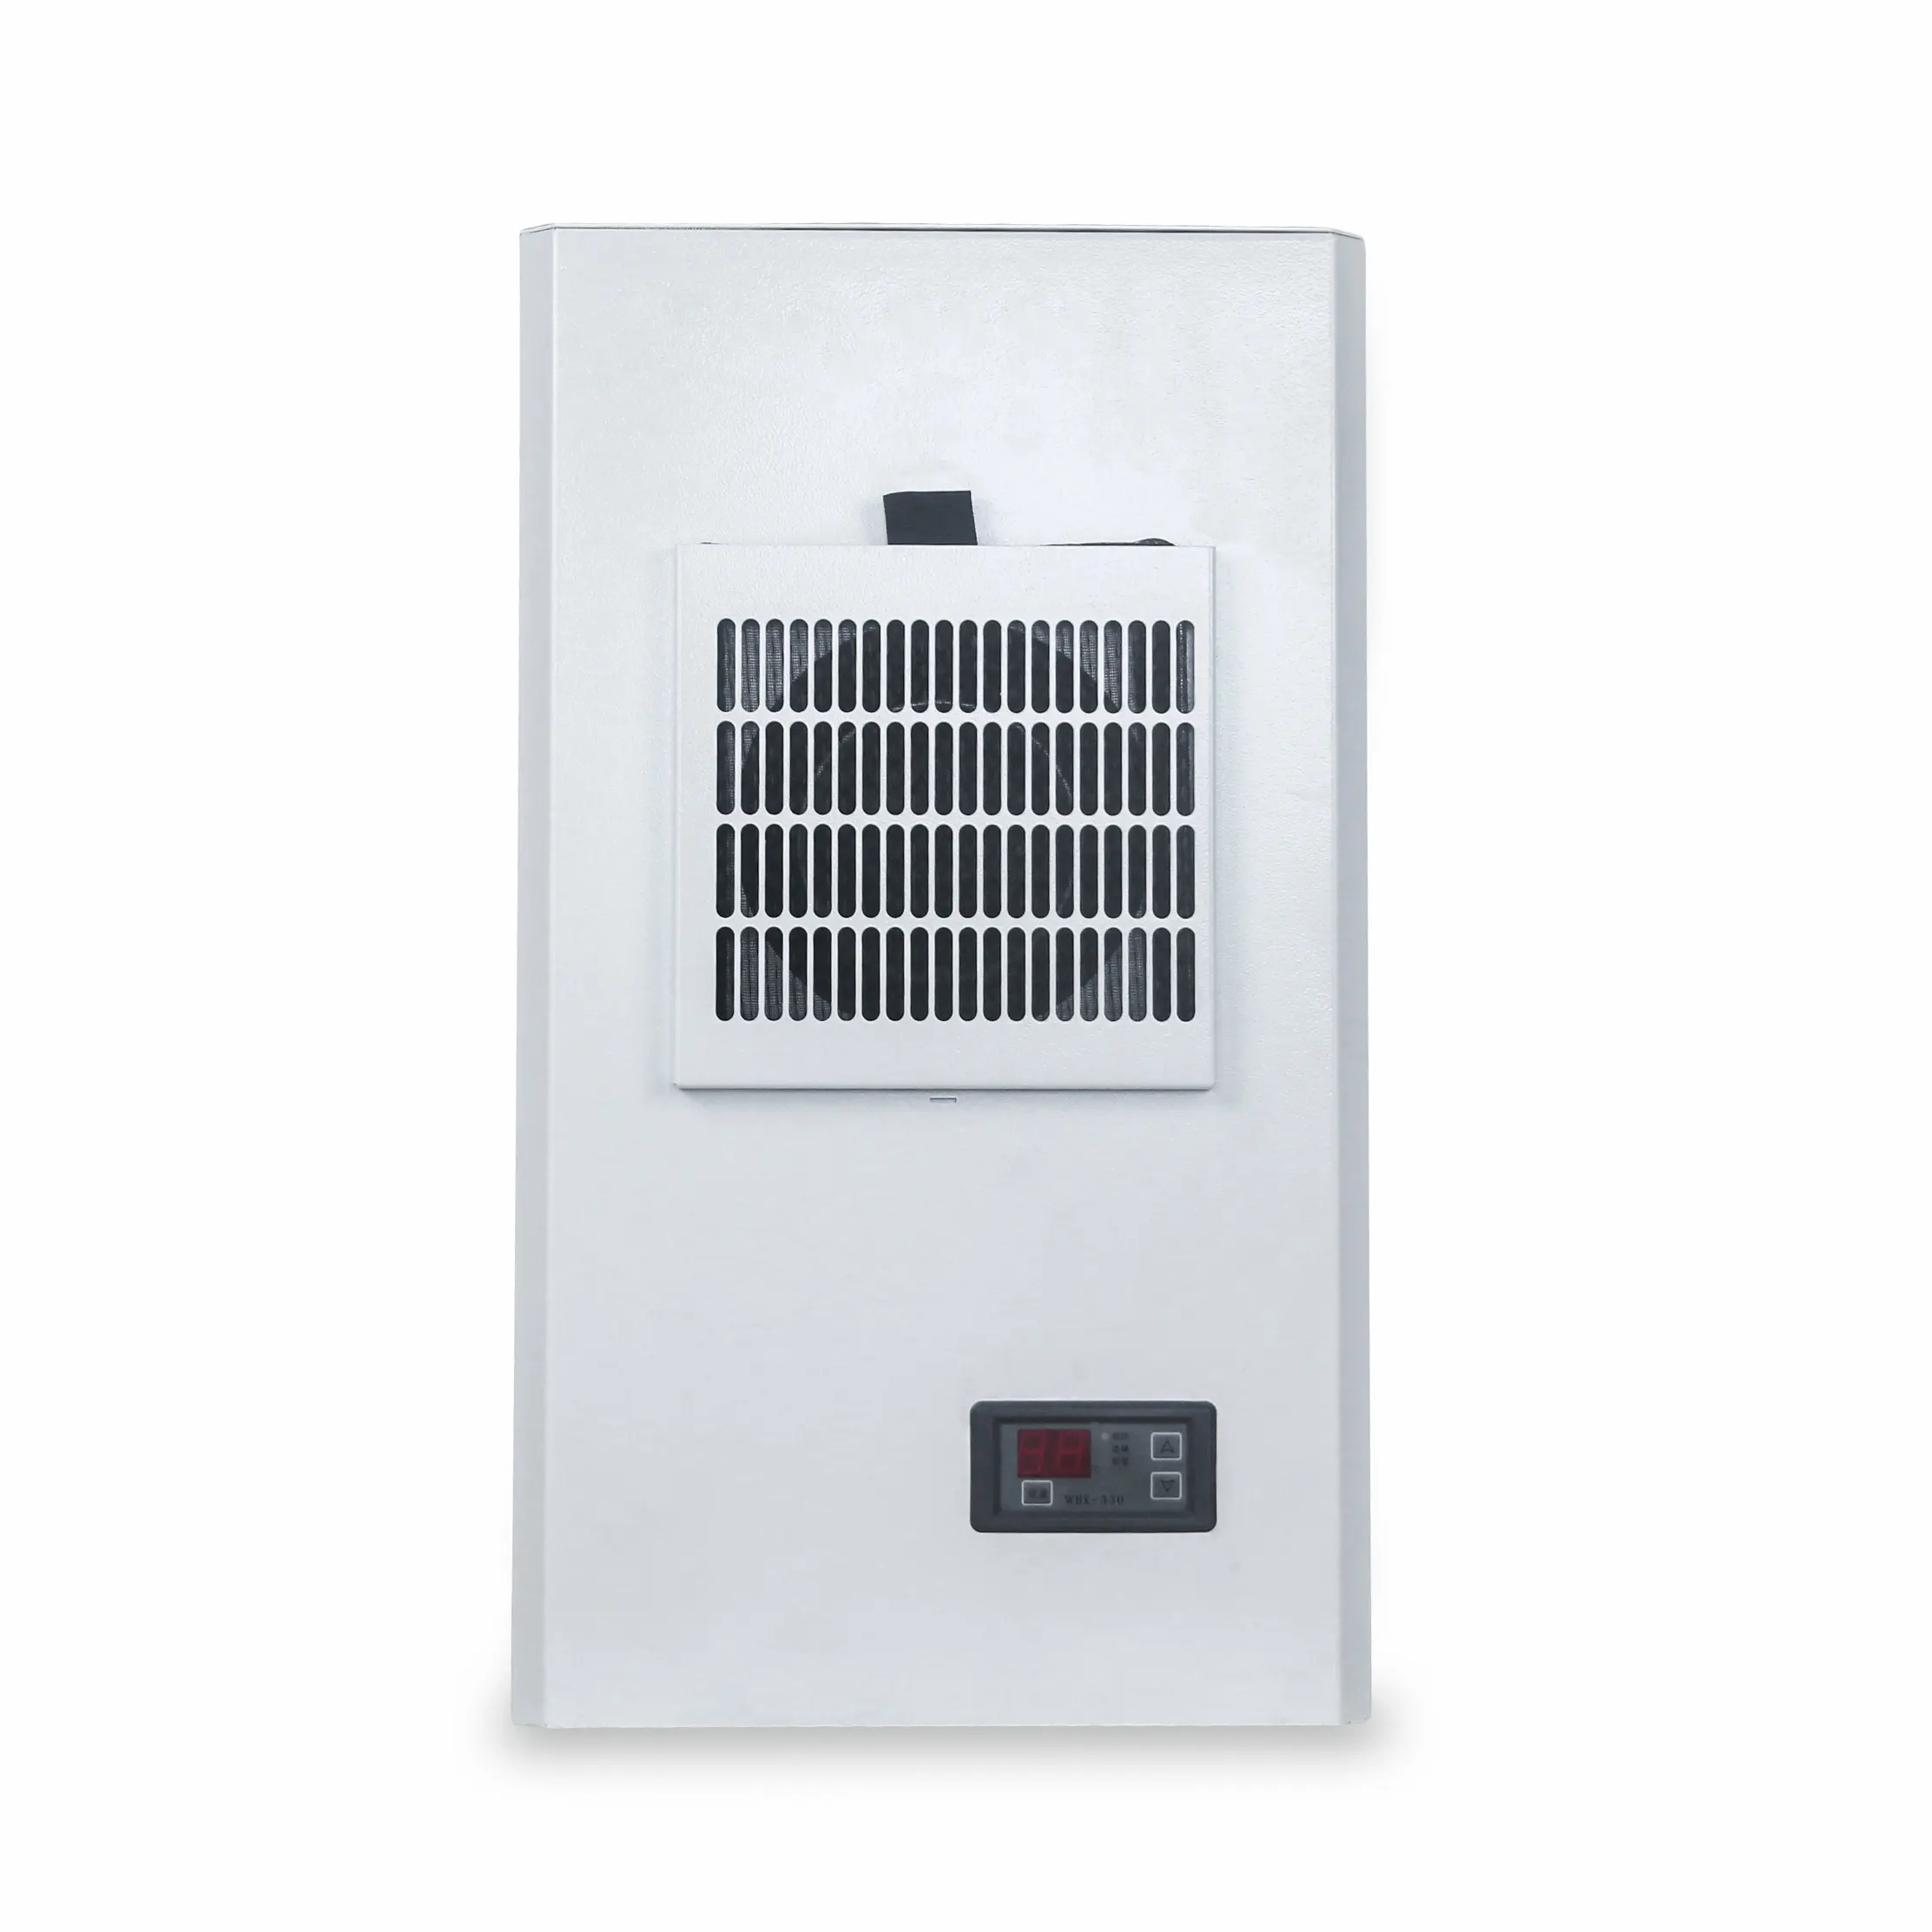 Industrial cabinet air conditioner for indoor data rack cabinet